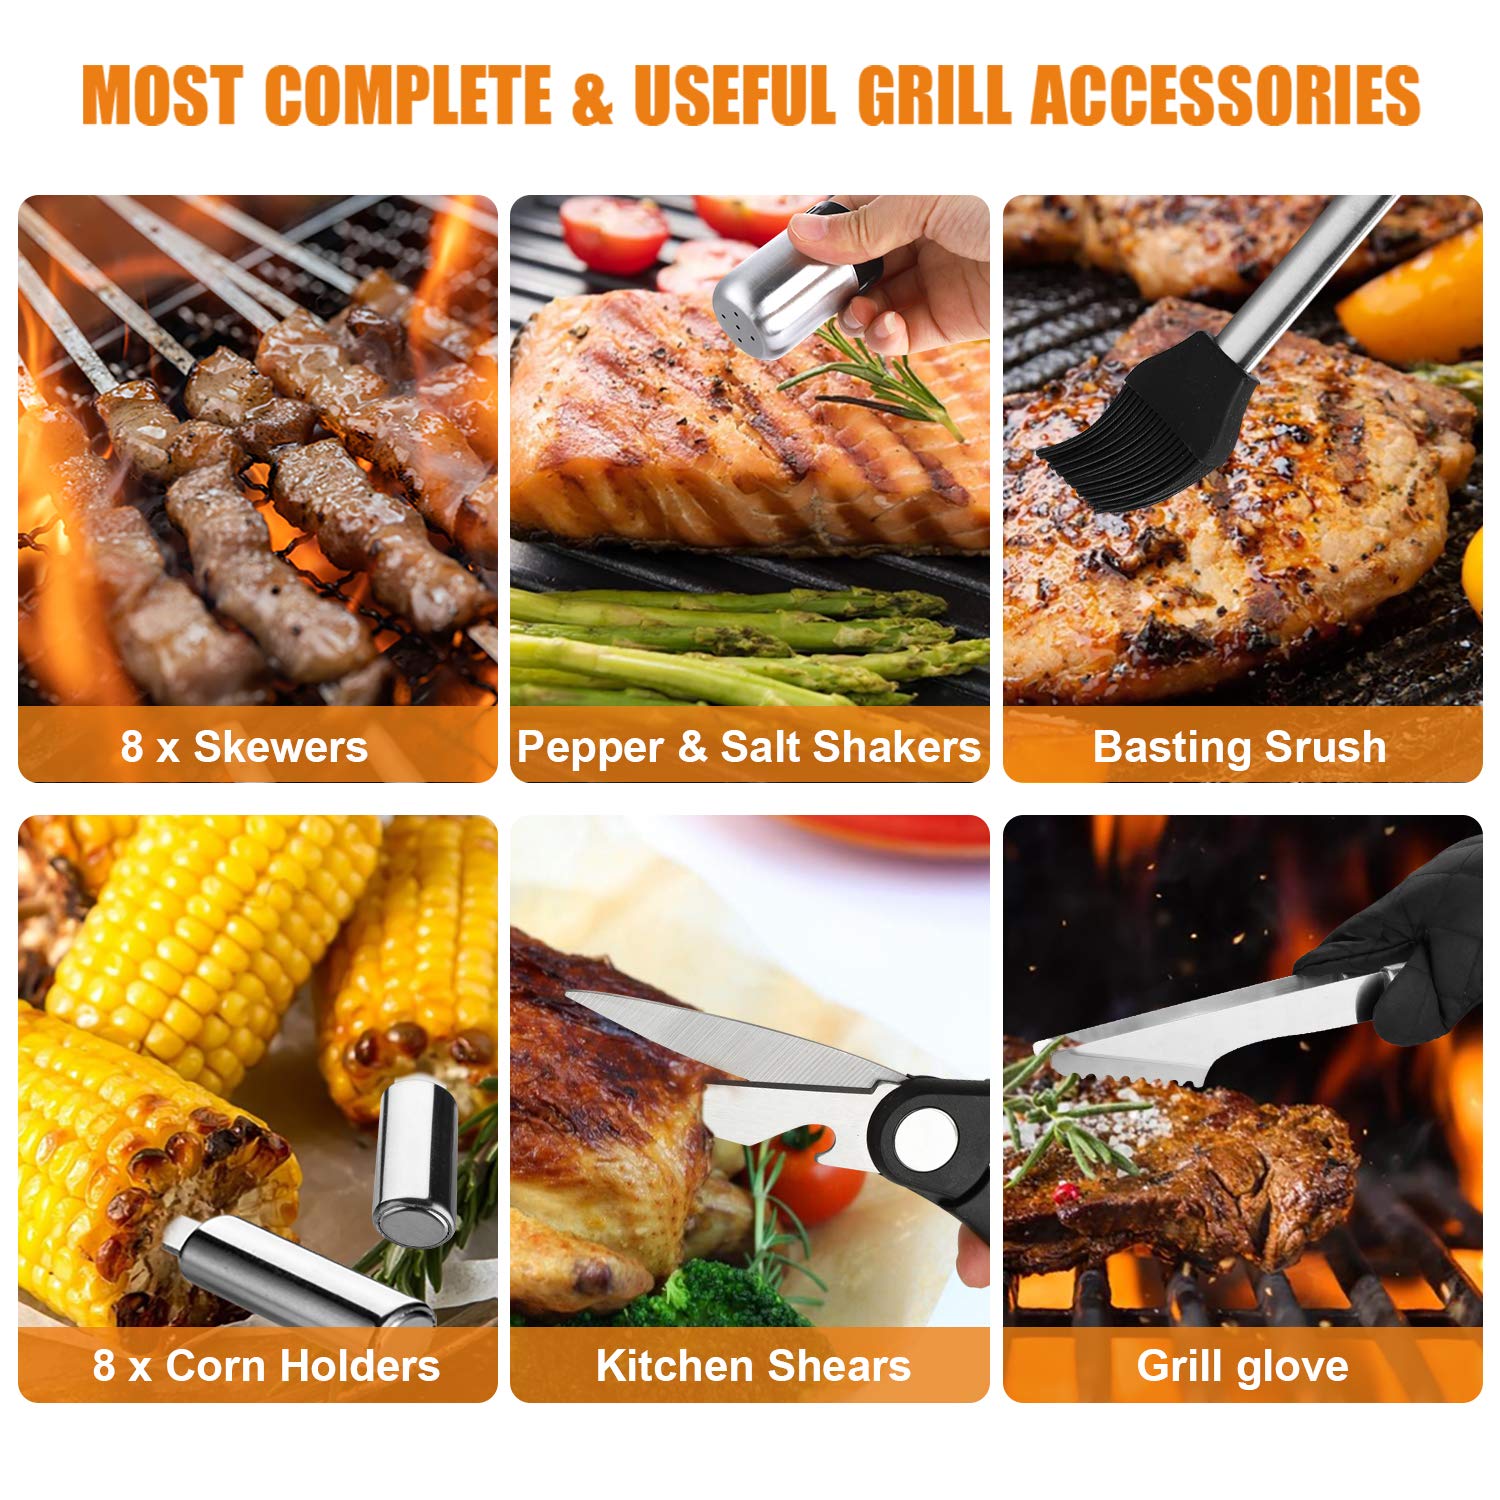 BBQ Grill Accessories Set, 38Pcs Stainless Steel Grill Tools Grilling Accessories with Aluminum Case, for Camping/Backyard Barbecue - image 4 of 7